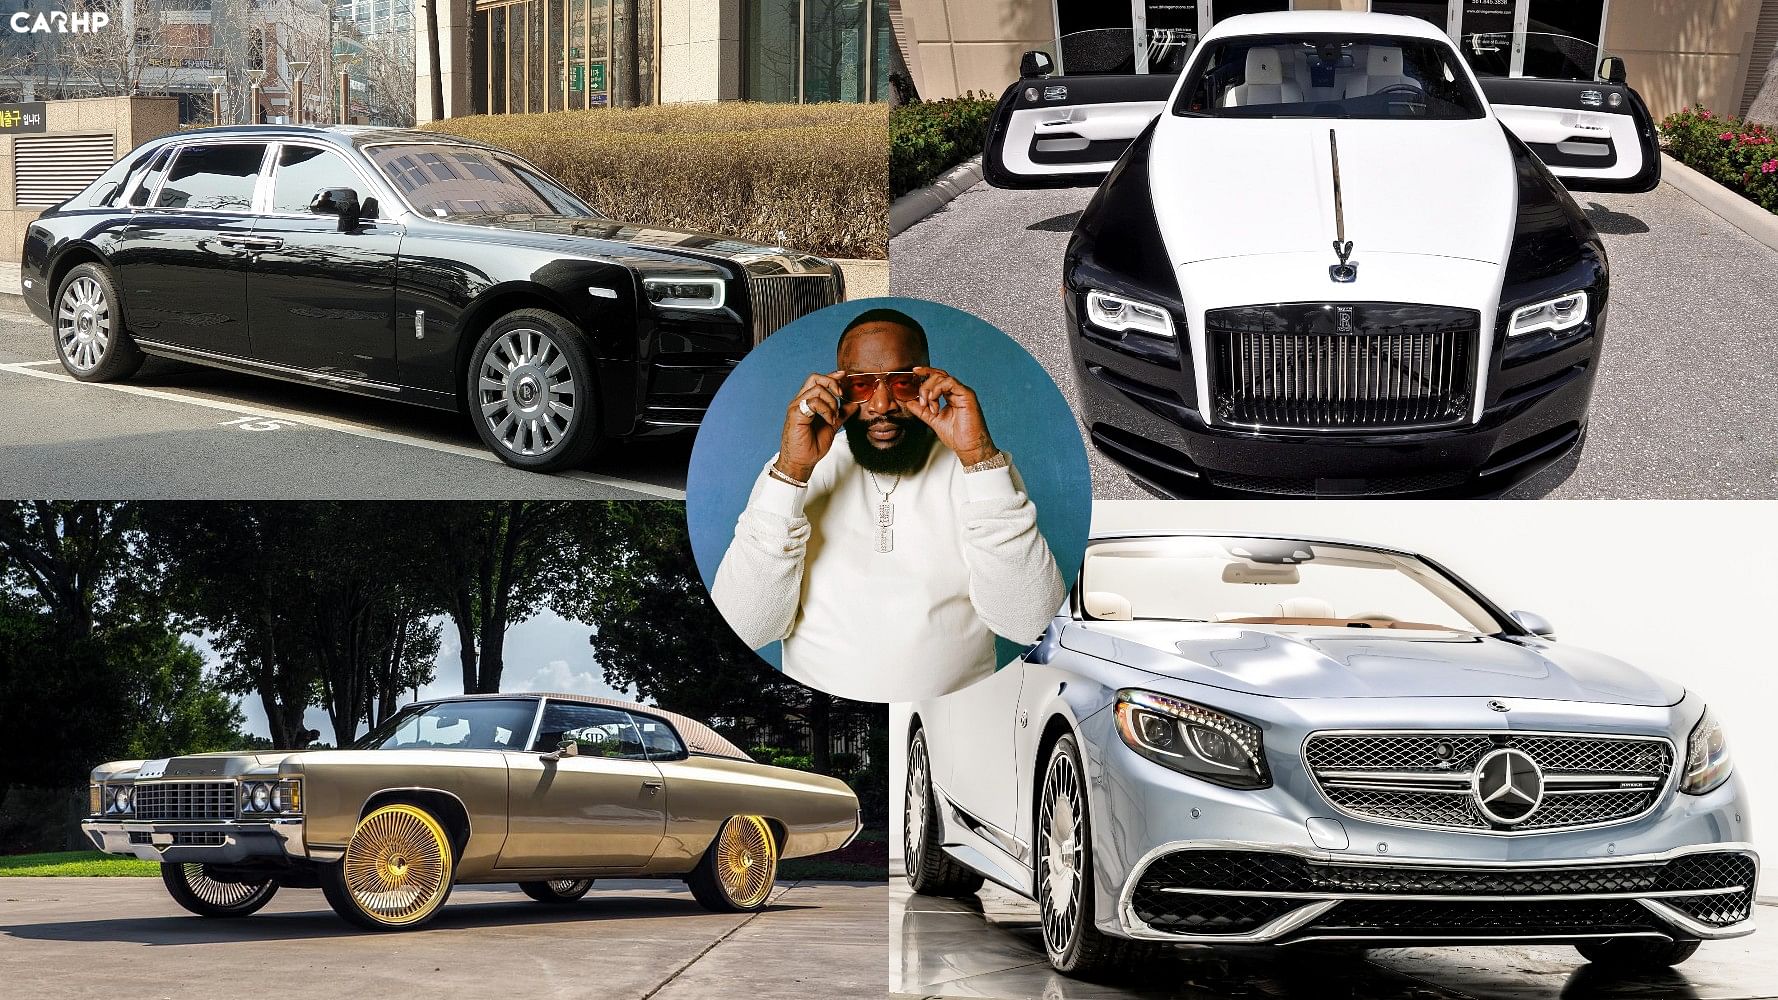 Rick Ross's Insane Car Collection: From Chevrolets To Rolls-Royces